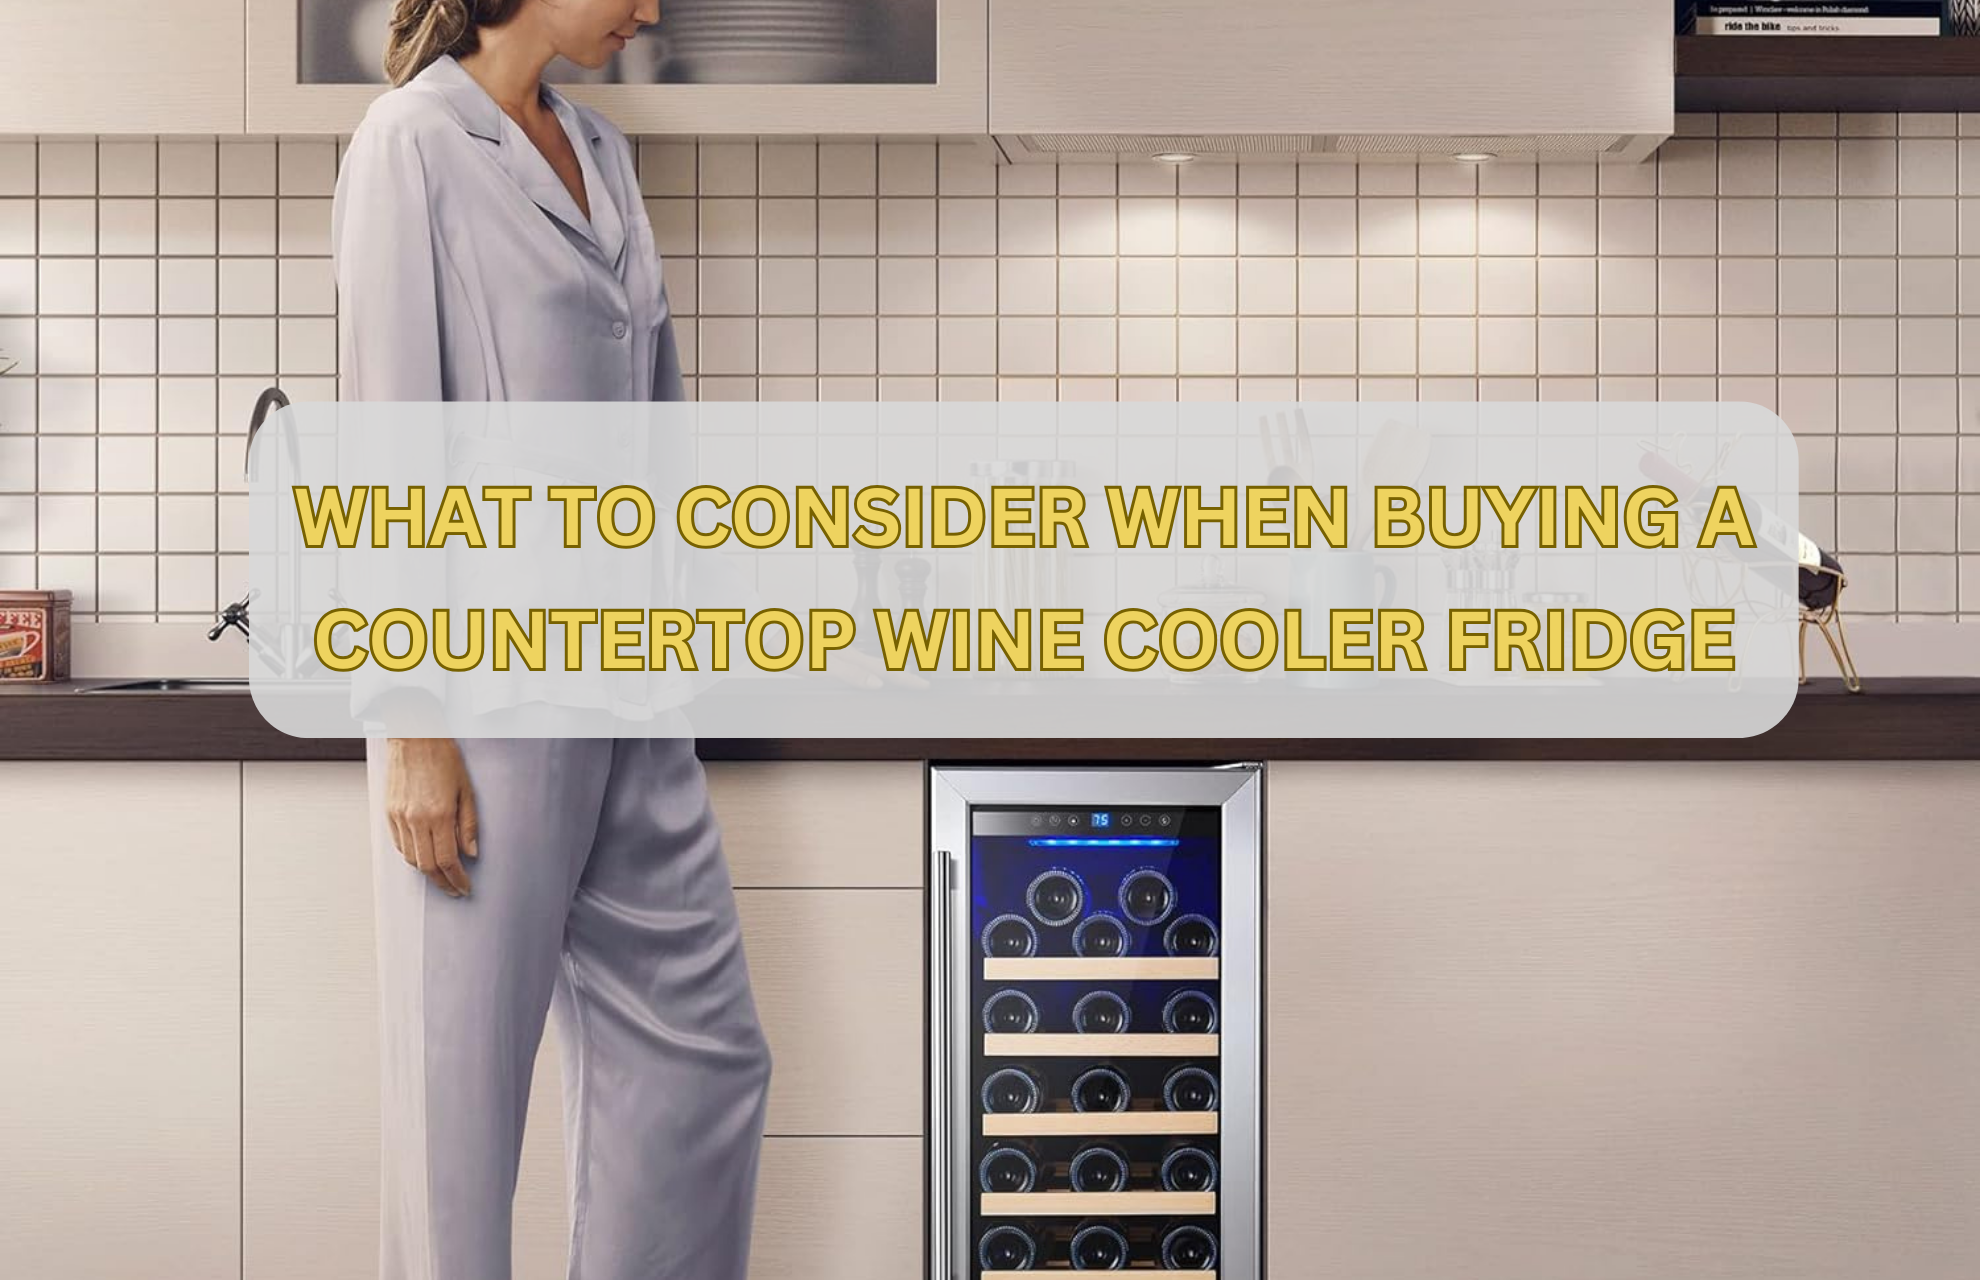 WHAT TO CONSIDER WHEN BUYING A COUNTERTOP WINE COOLER FRIDGE